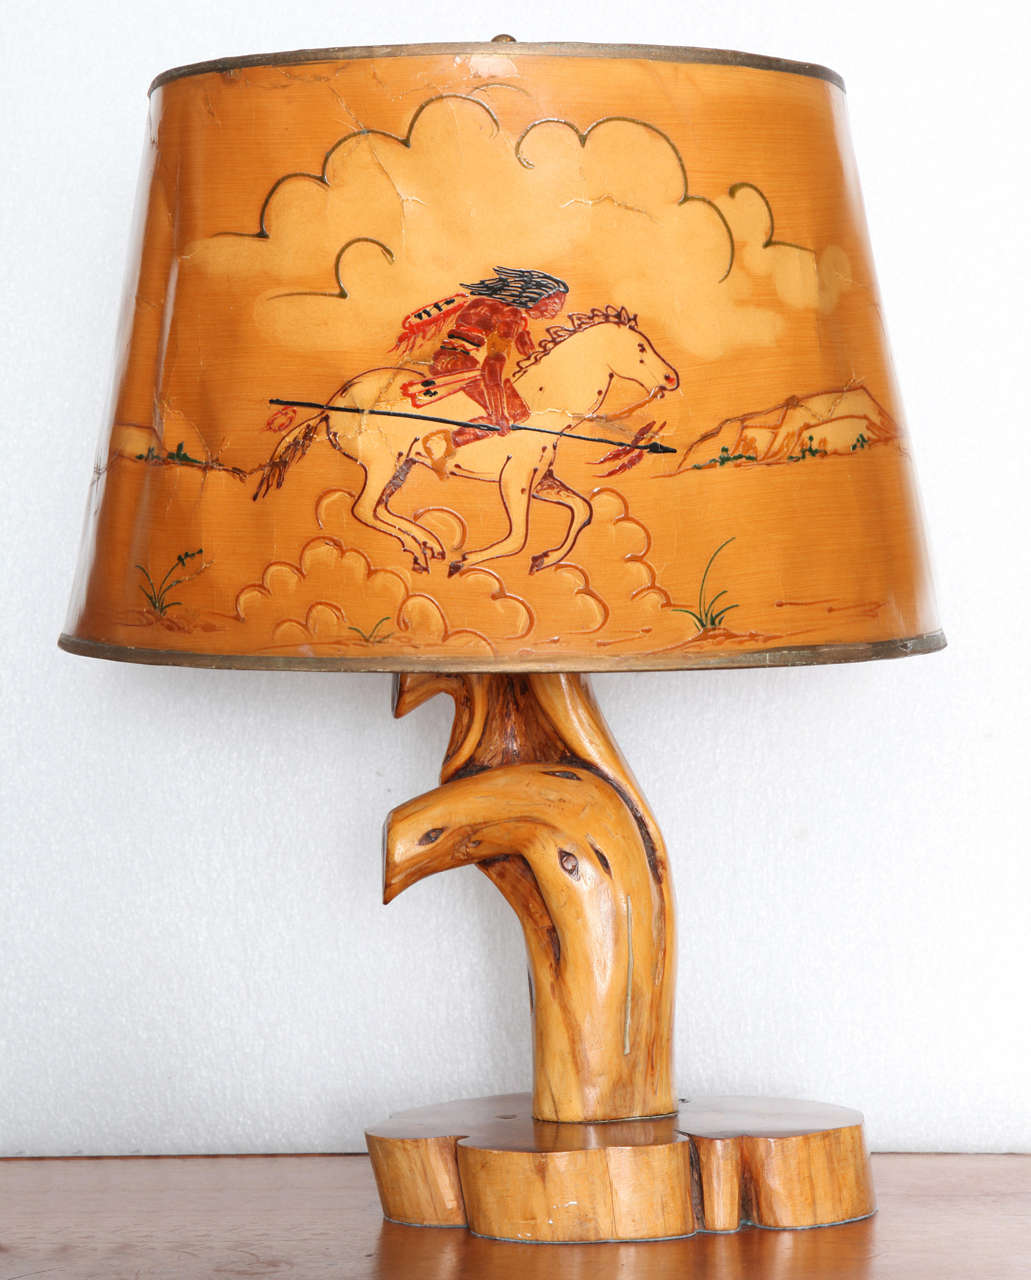 Influenced by the work of Thomas Molesworth’s Shoshone furniture company, the burl root lamp base with goatskin lampshade has exquisite hand-painted scene of Indian brave on horseback hunting buffalo with spear.

Comes from Wyoming. 